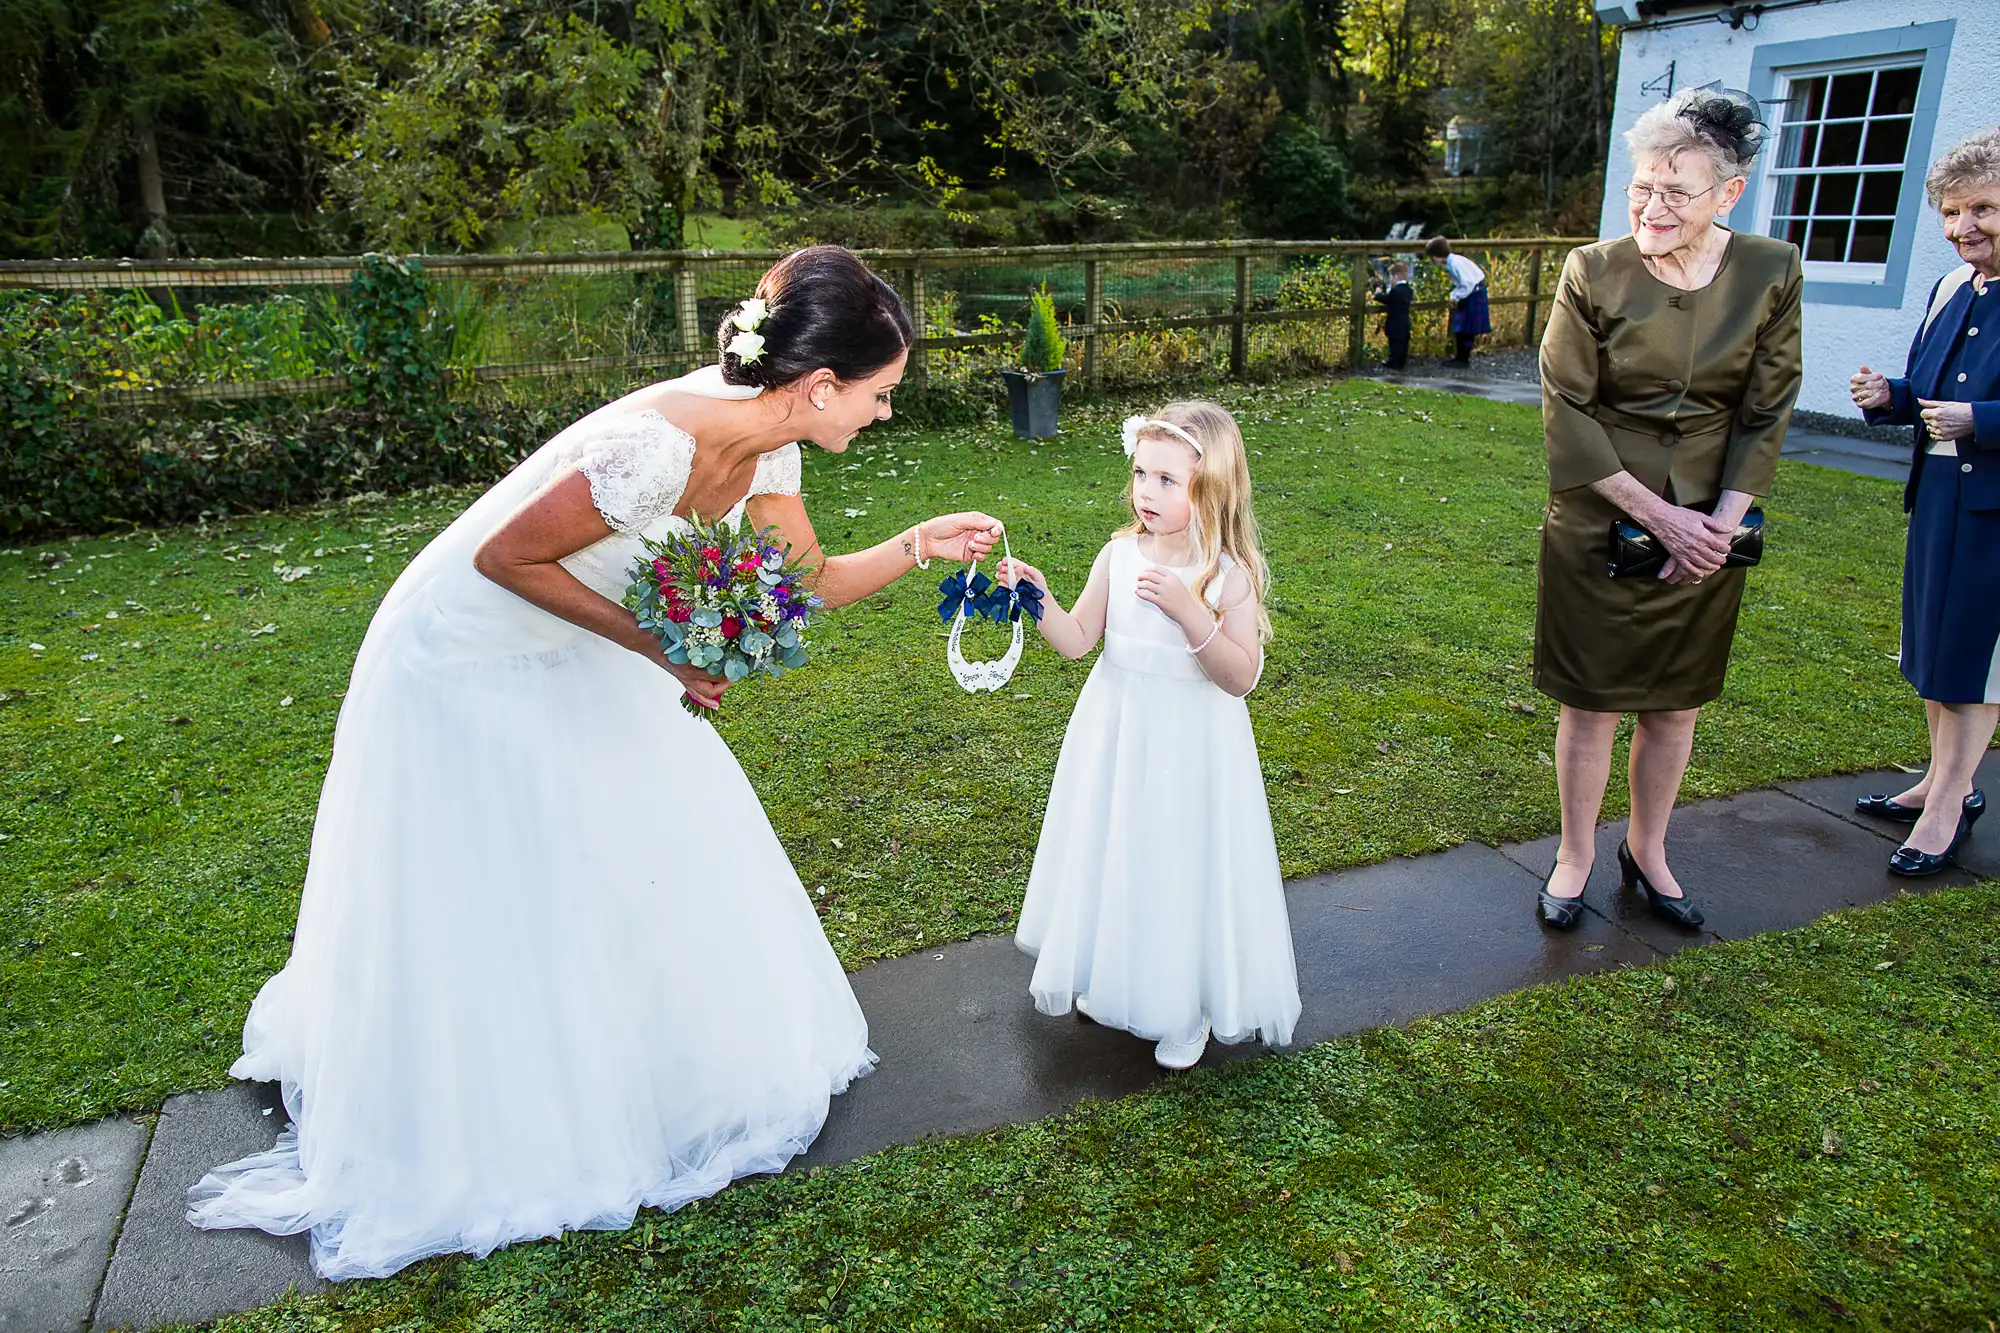 A bride in a white gown leans down to talk to a young flower girl in a white dress, with two older women looking on, in an outdoor setting.